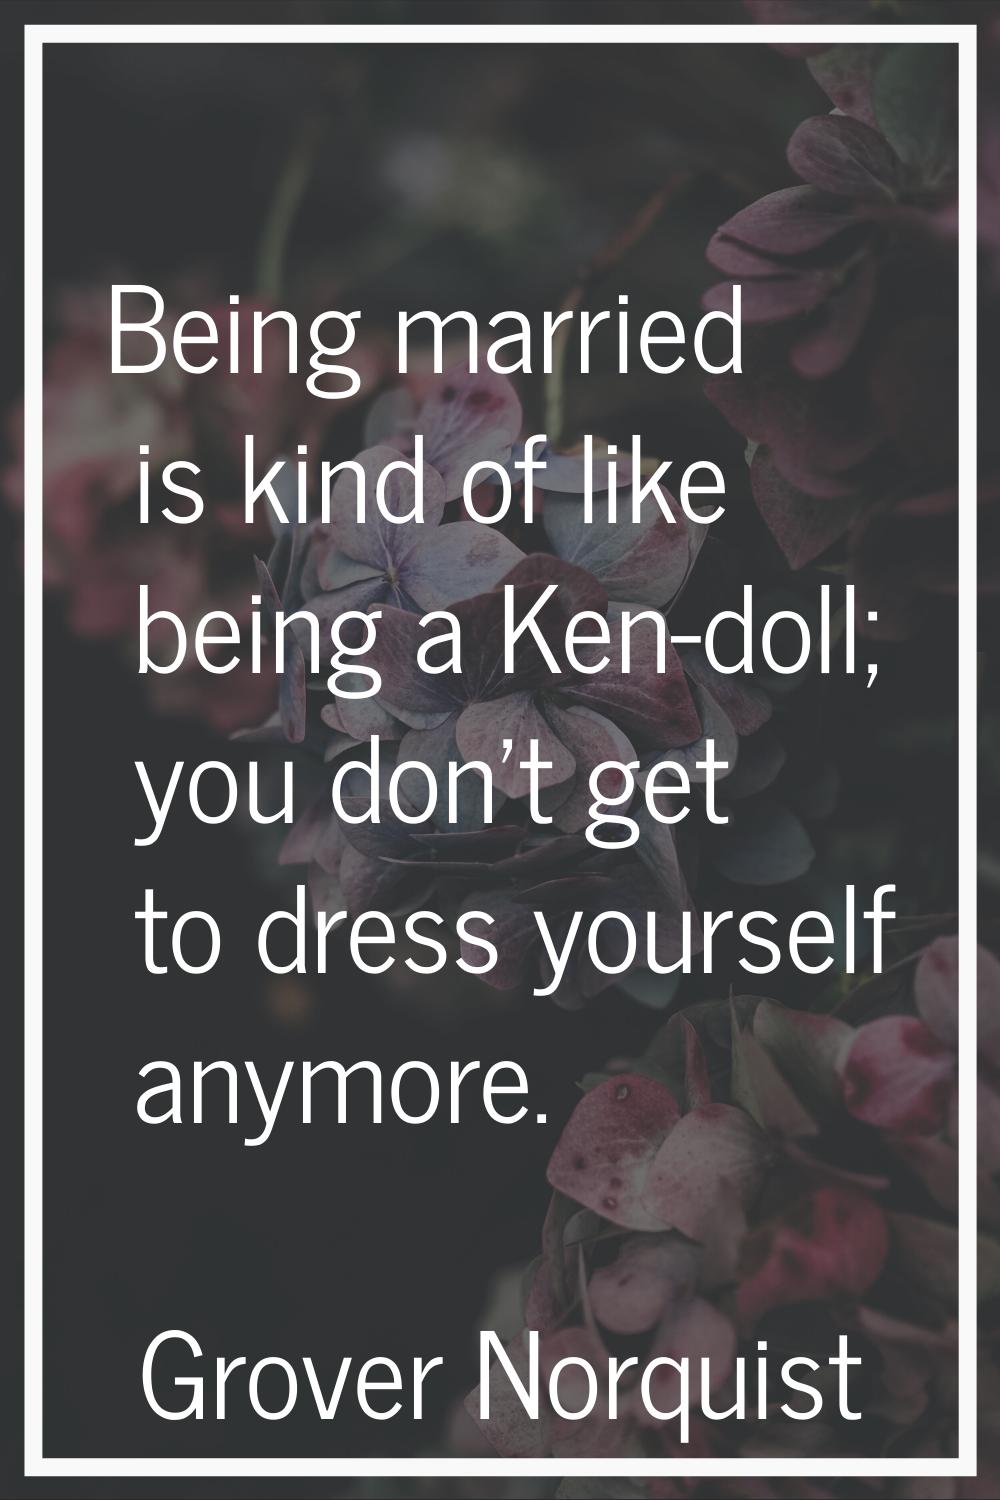 Being married is kind of like being a Ken-doll; you don't get to dress yourself anymore.